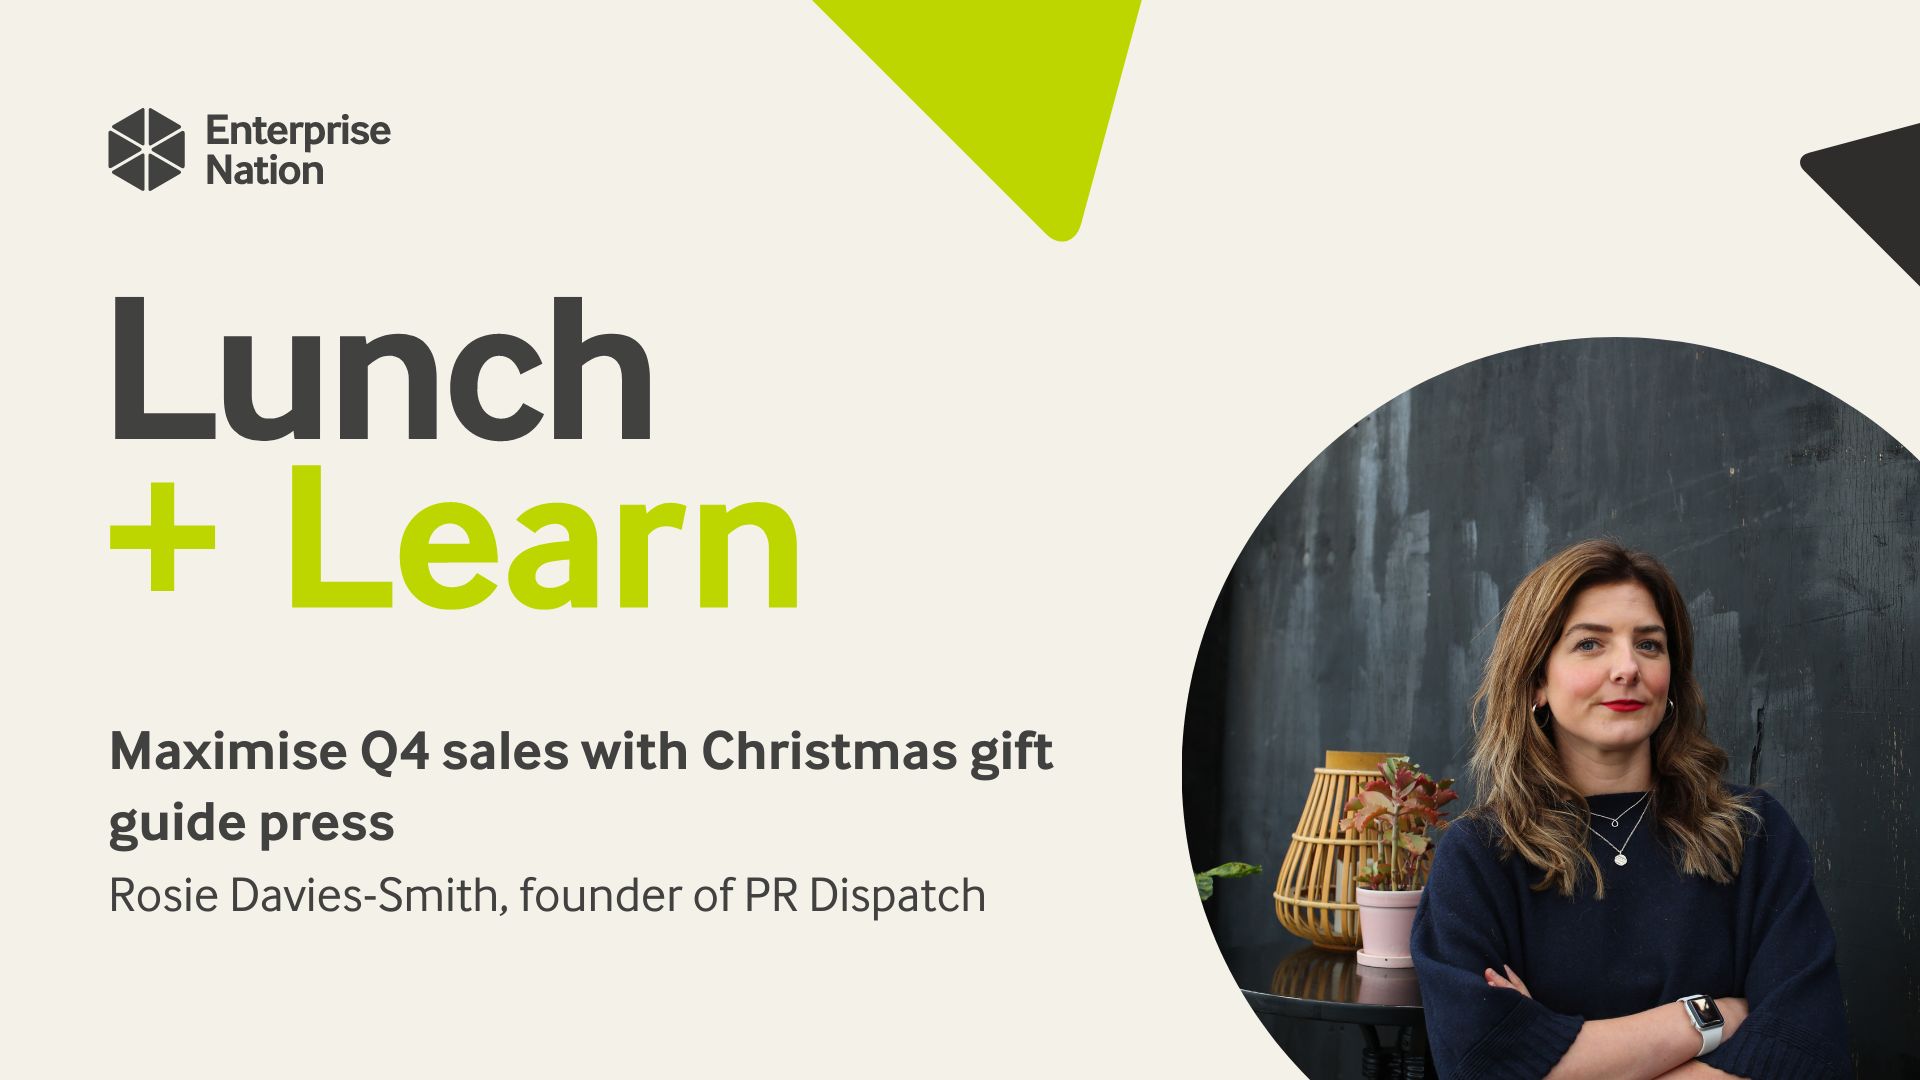 Lunch and Learn: Maximise Q4 sales with Christmas gift guide press